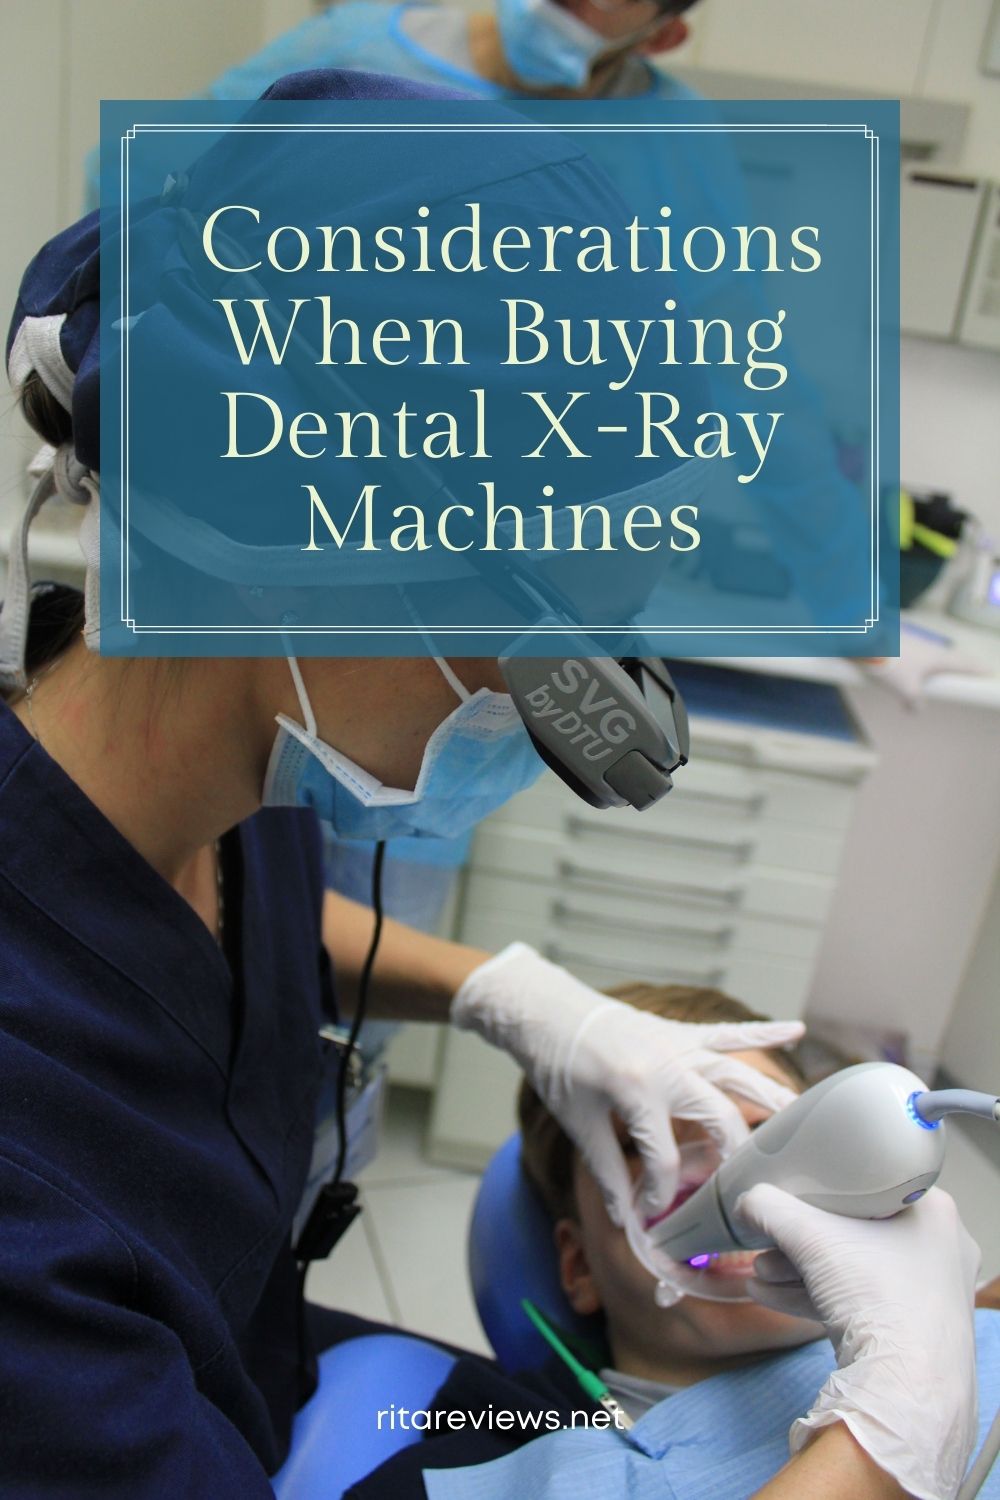 5 Considerations When Buying Dental X-Ray Machines